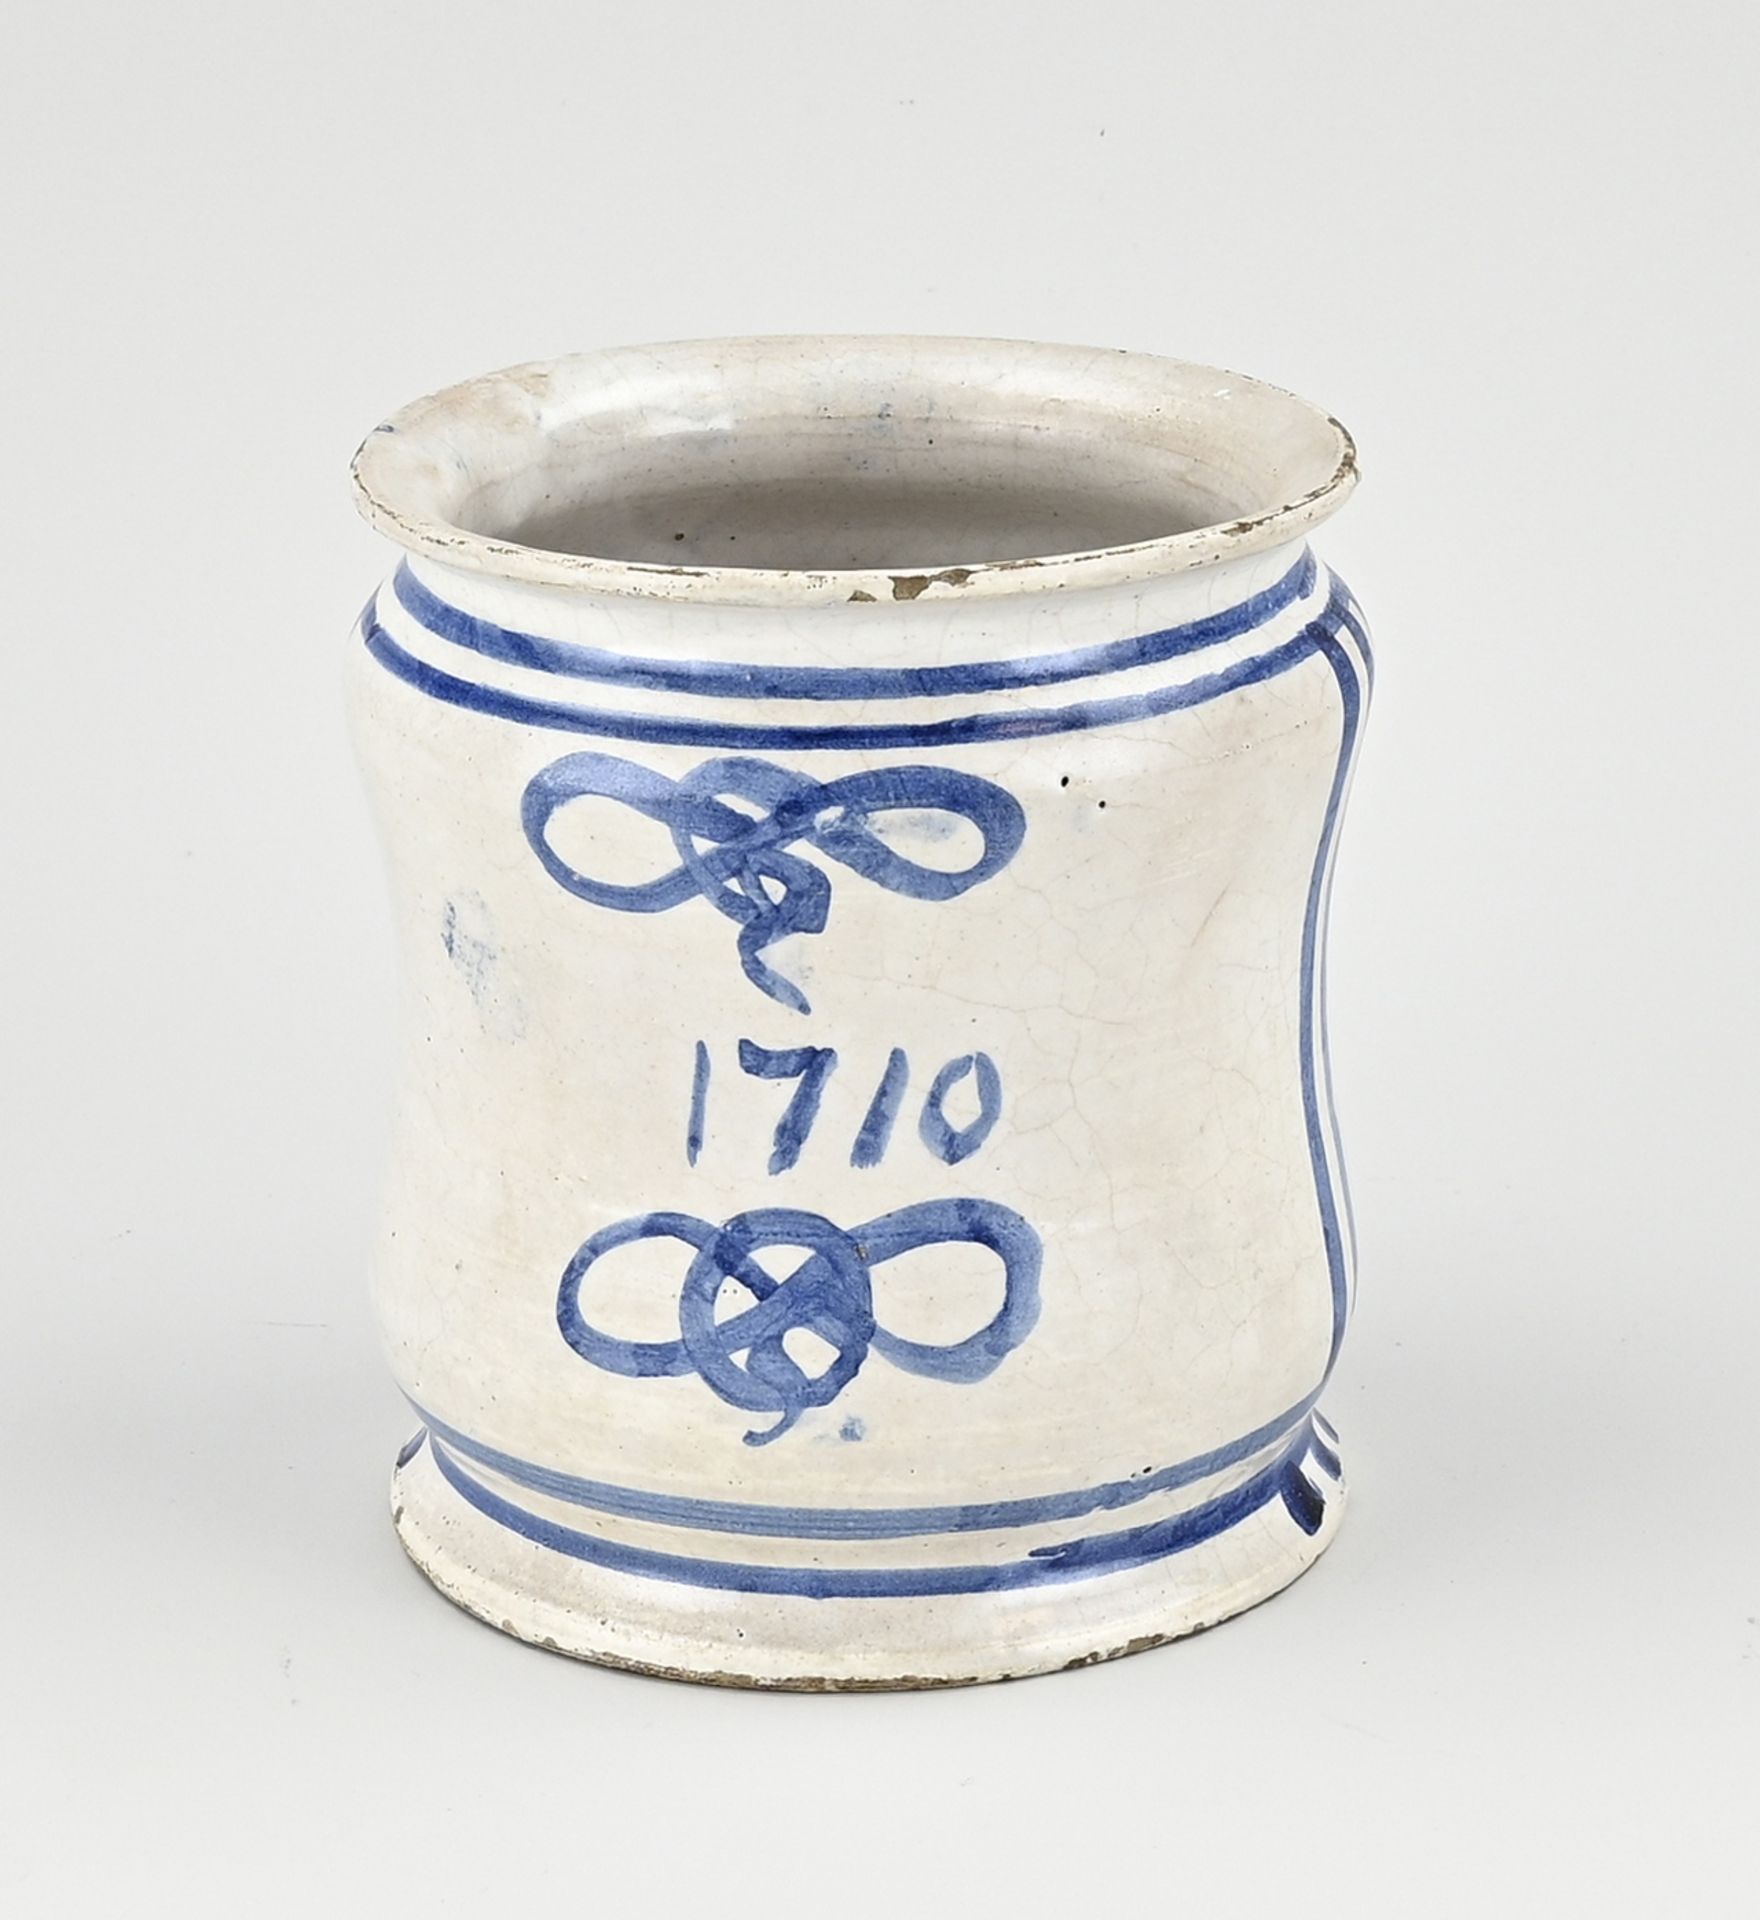 Delft apothecary jar - Image 2 of 3